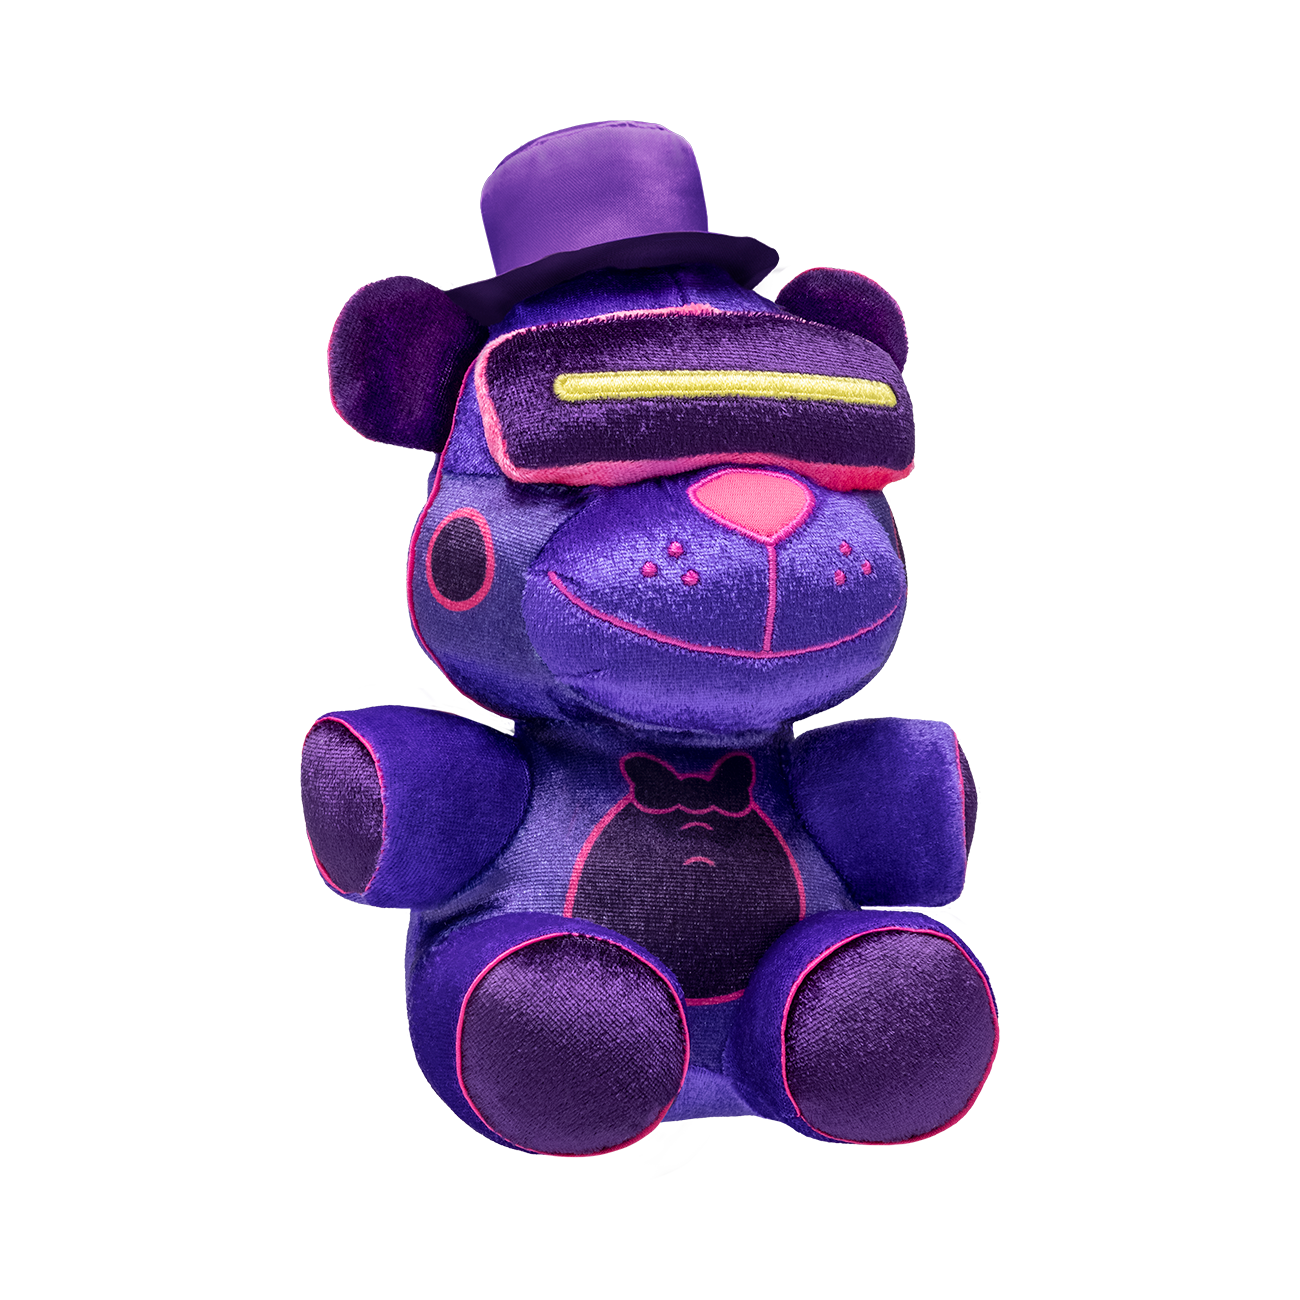 Funko Five Nights at Freddy's Collectible Neon Plush (Styles May Vary)